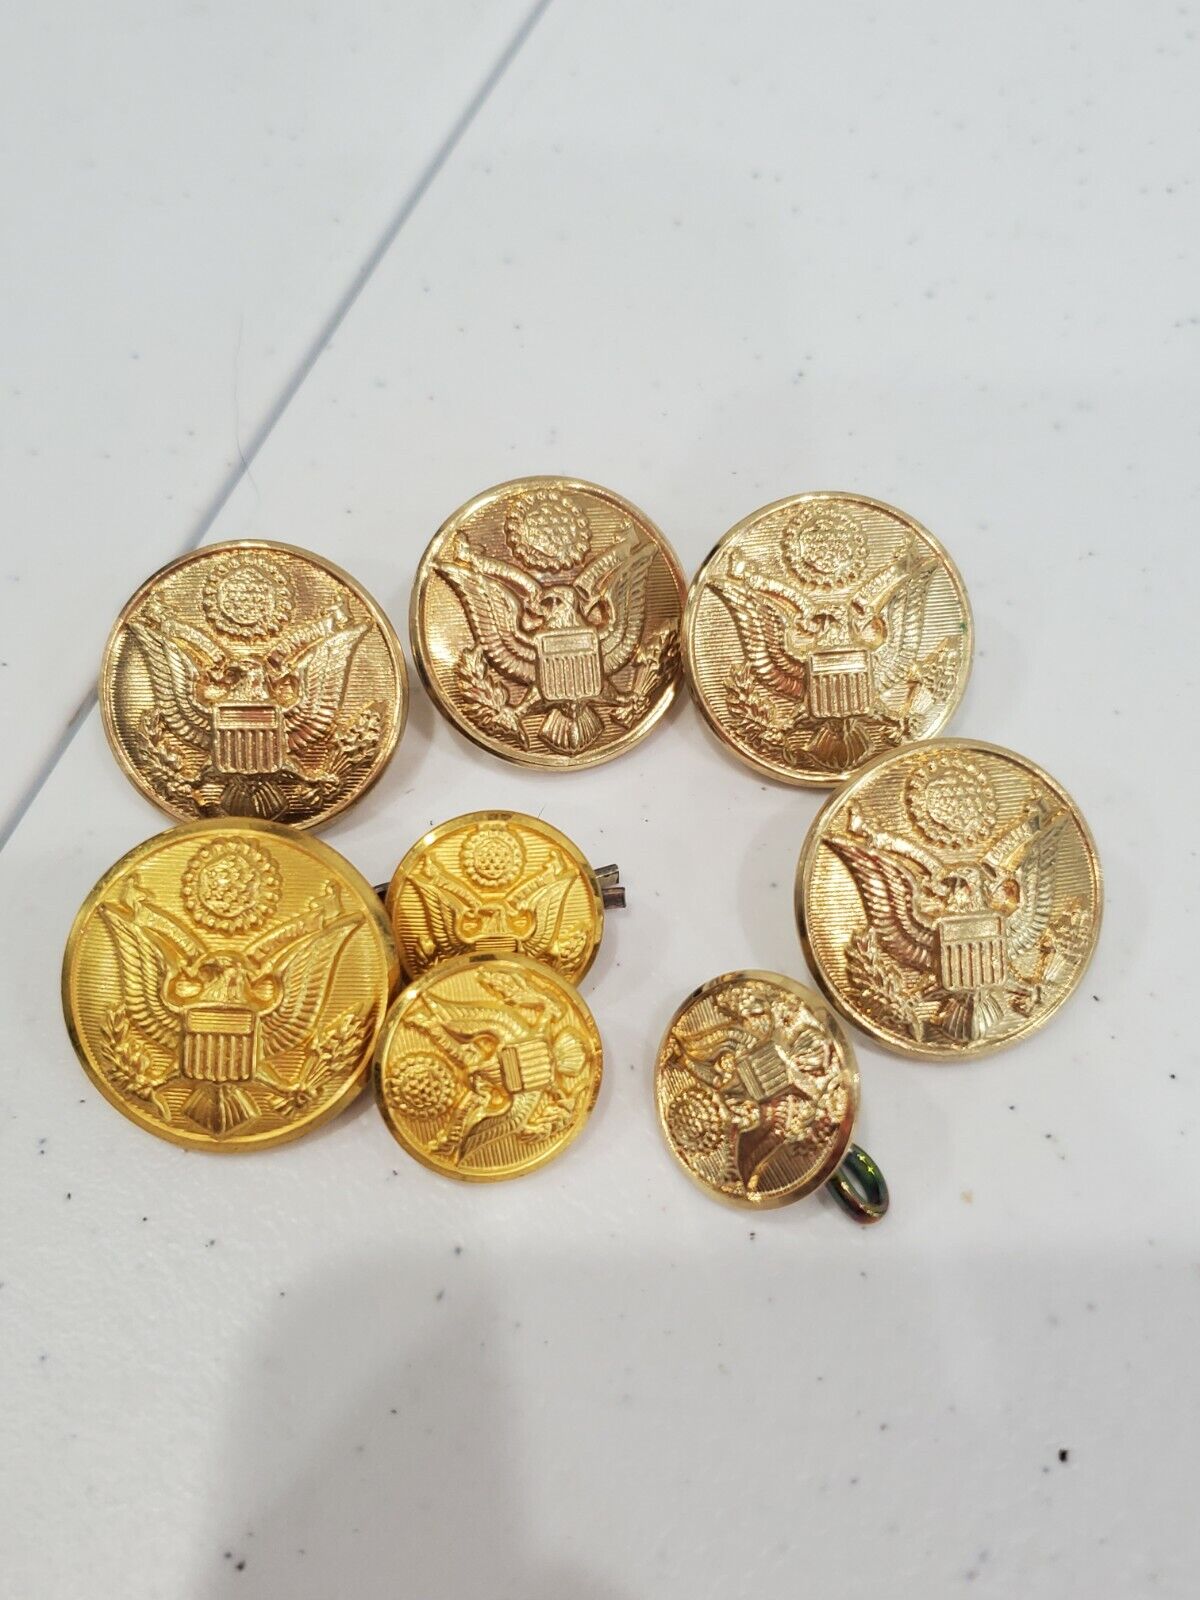 US Army Officer Uniform Buttons Lot of 8 Military Eagle Crest Vintage 